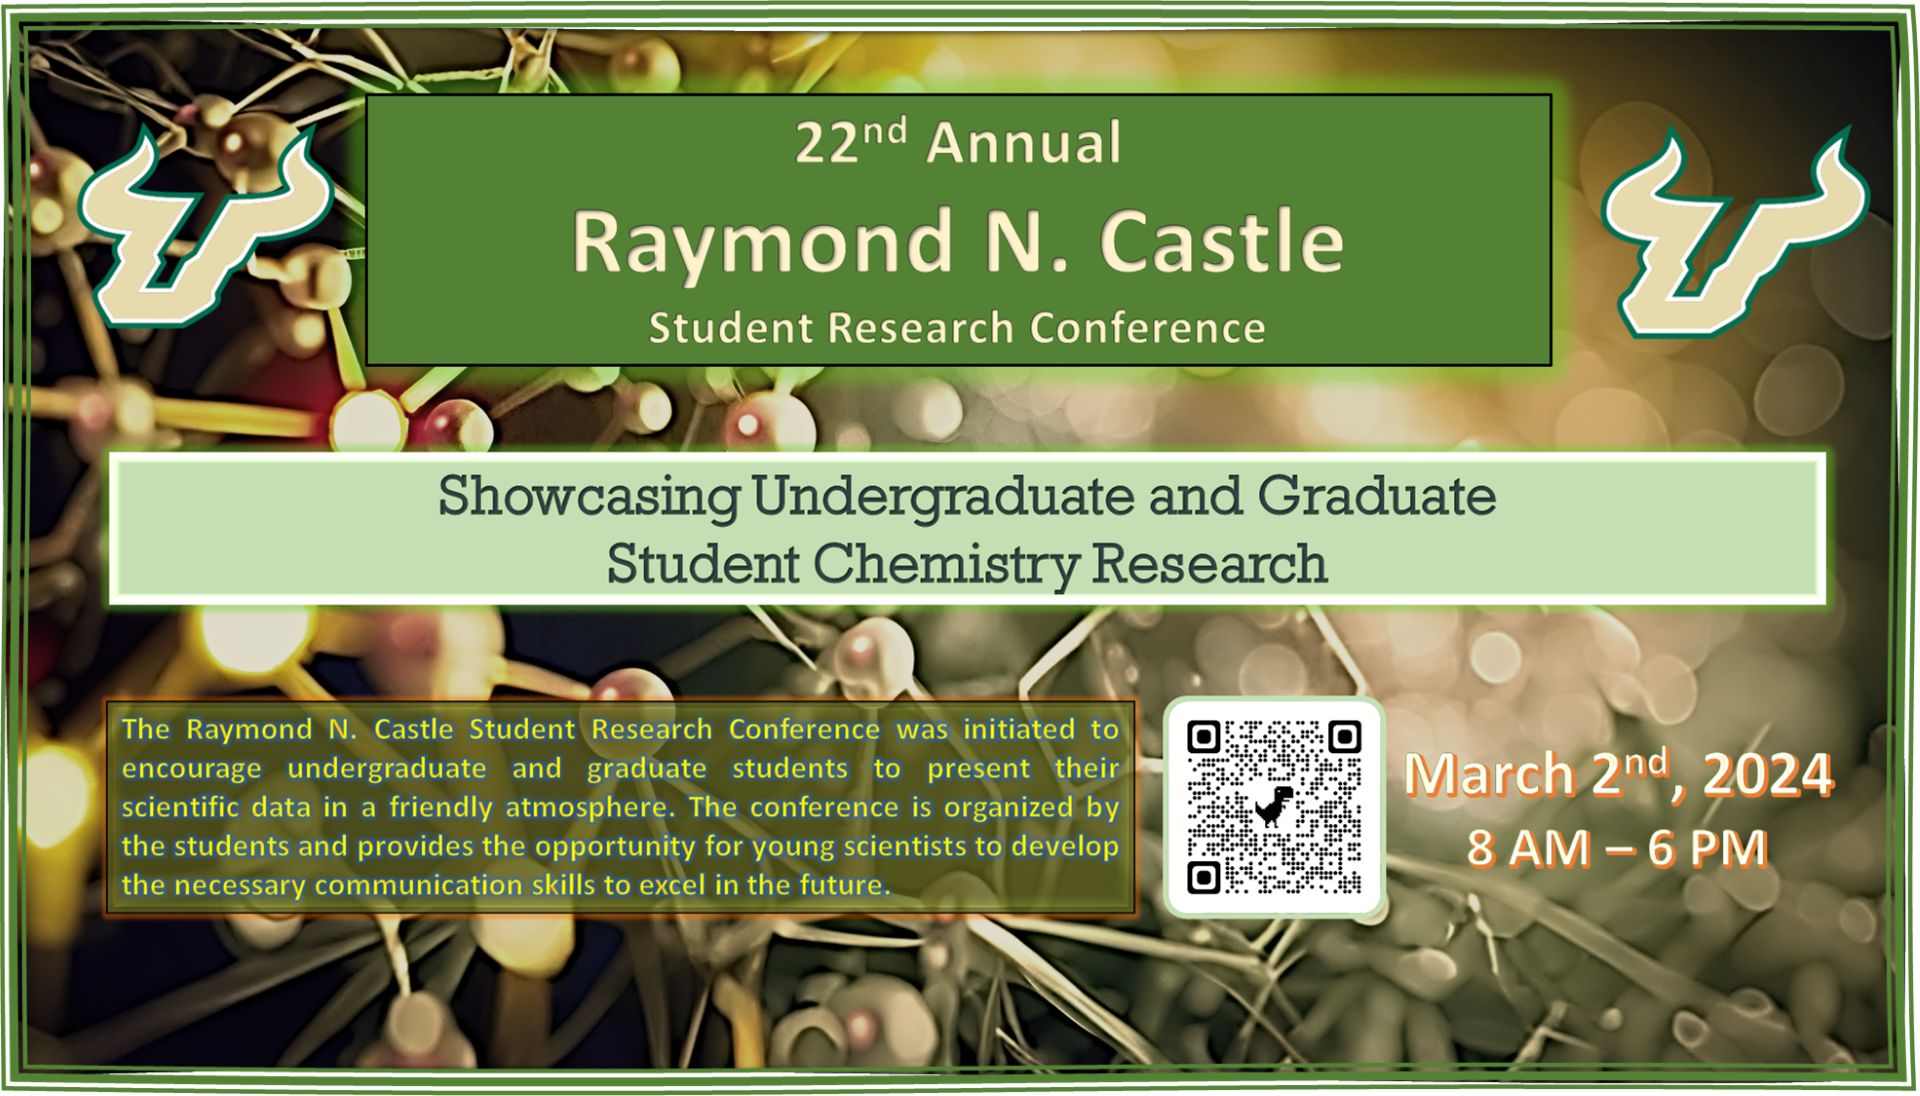 Raymond N. Castle student research conference banner